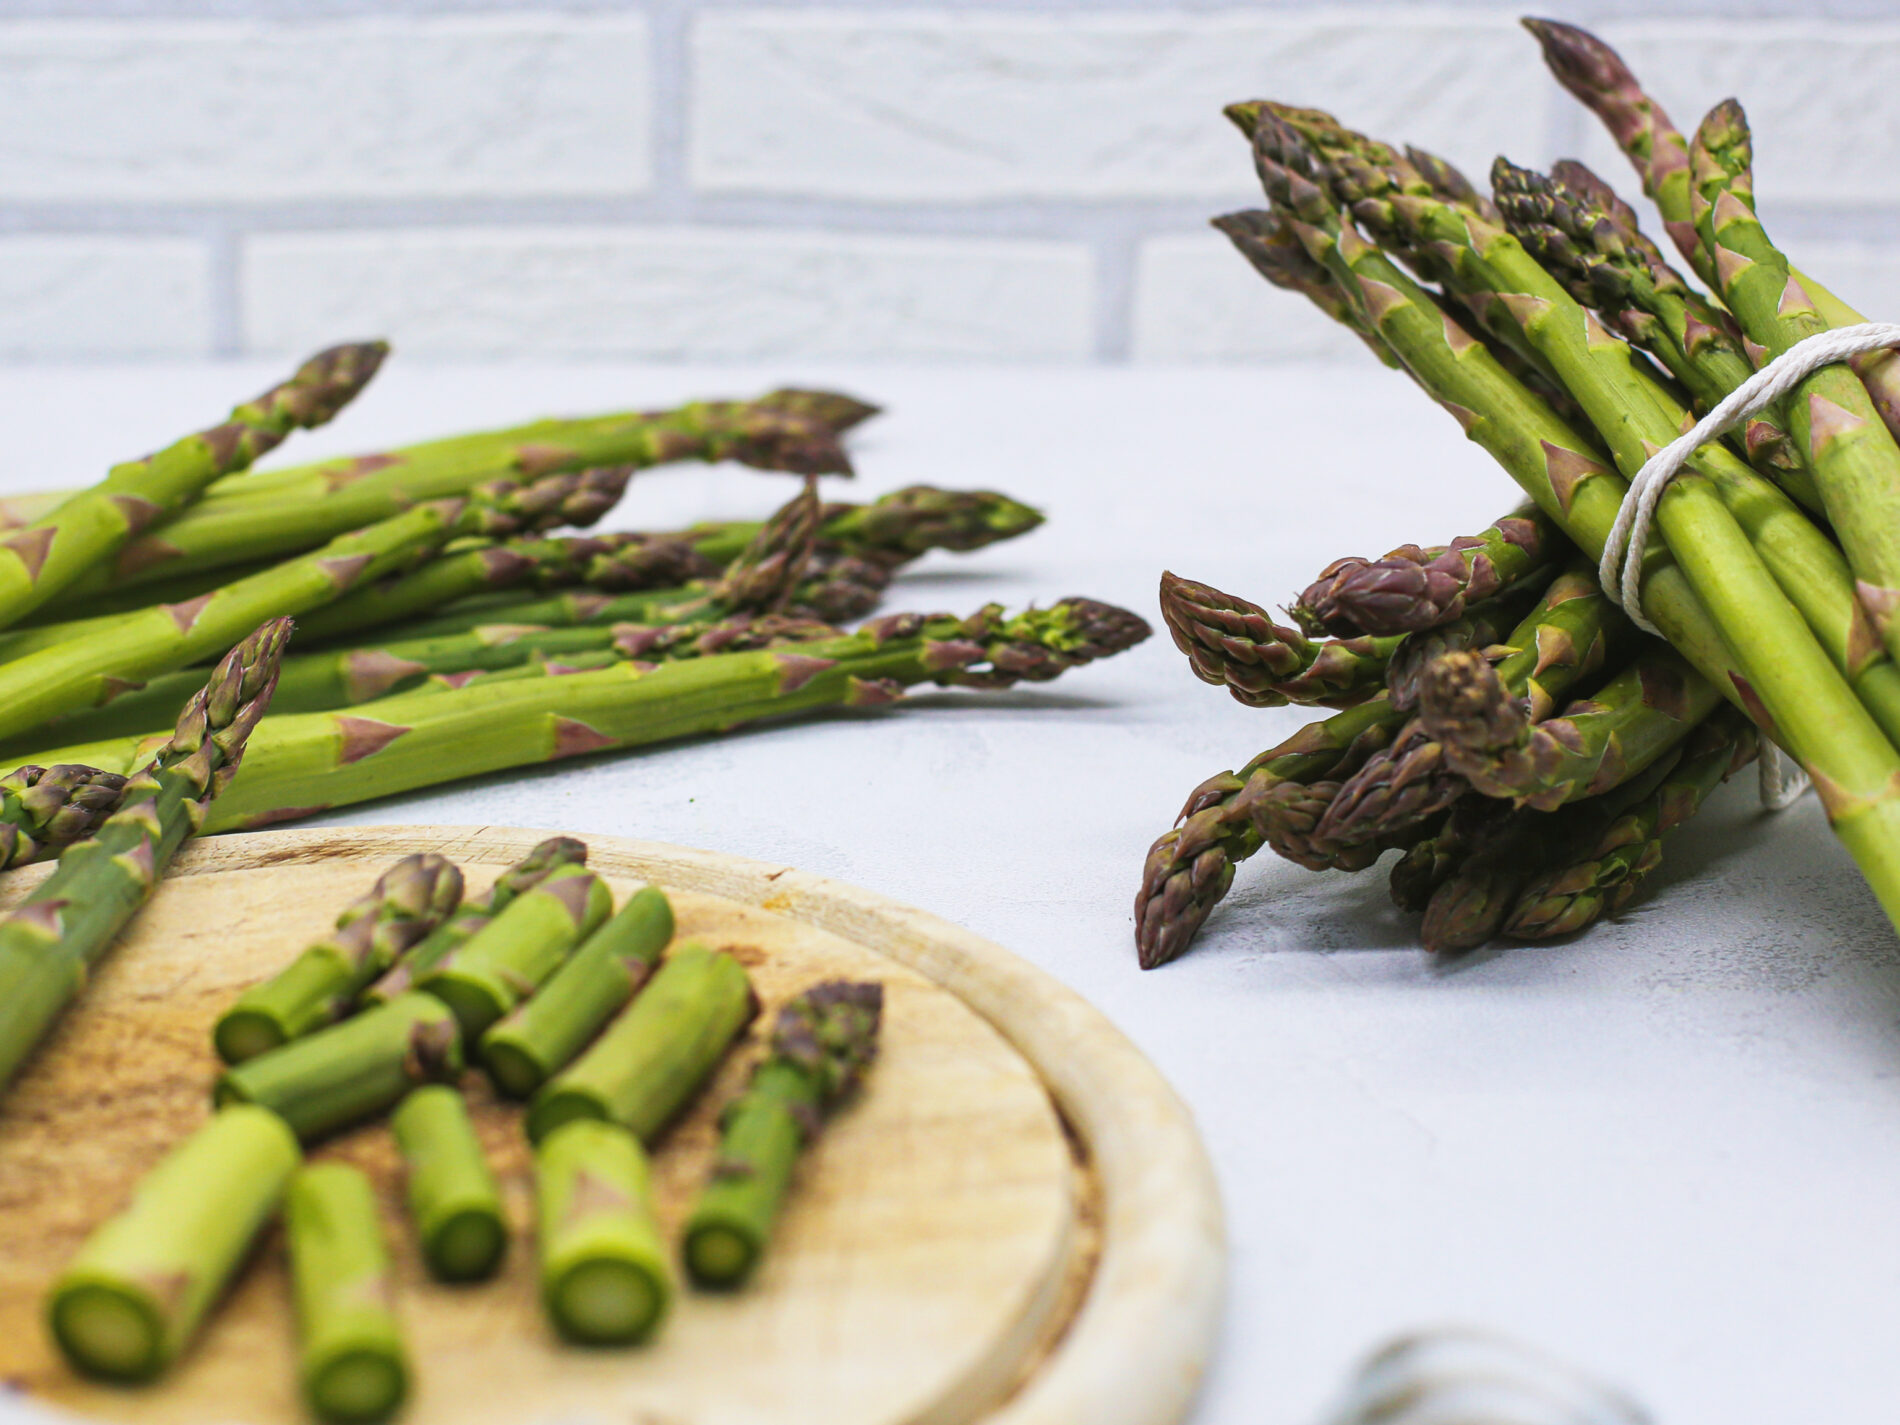 Green asparagus in bunches and cut on a cutting board